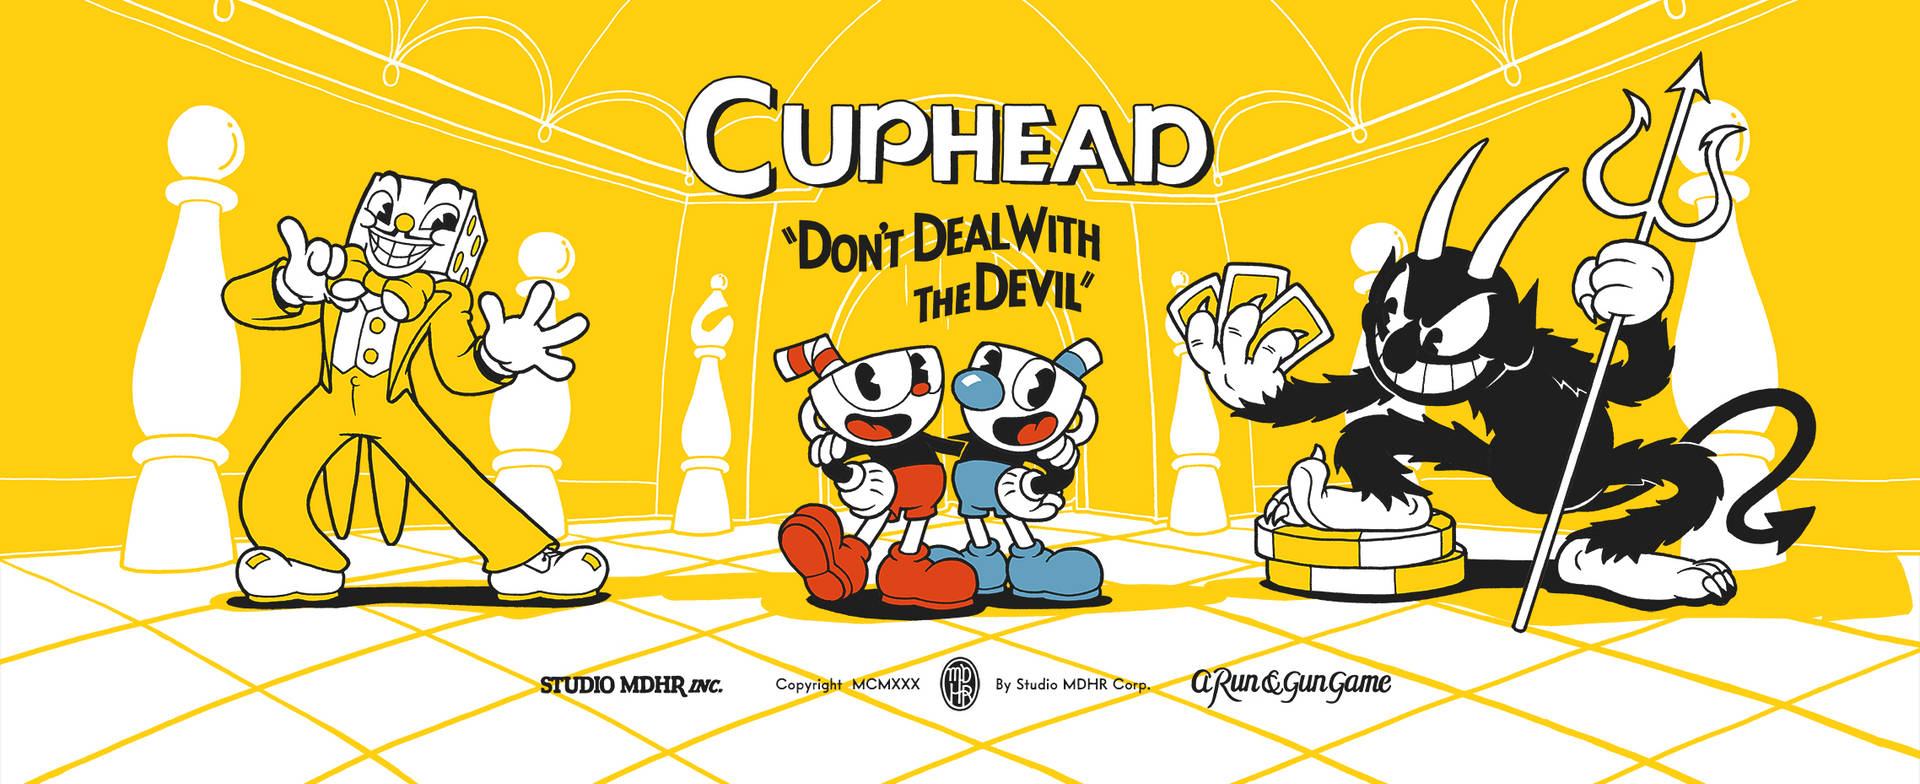 Cuphead Yellow Poster Background